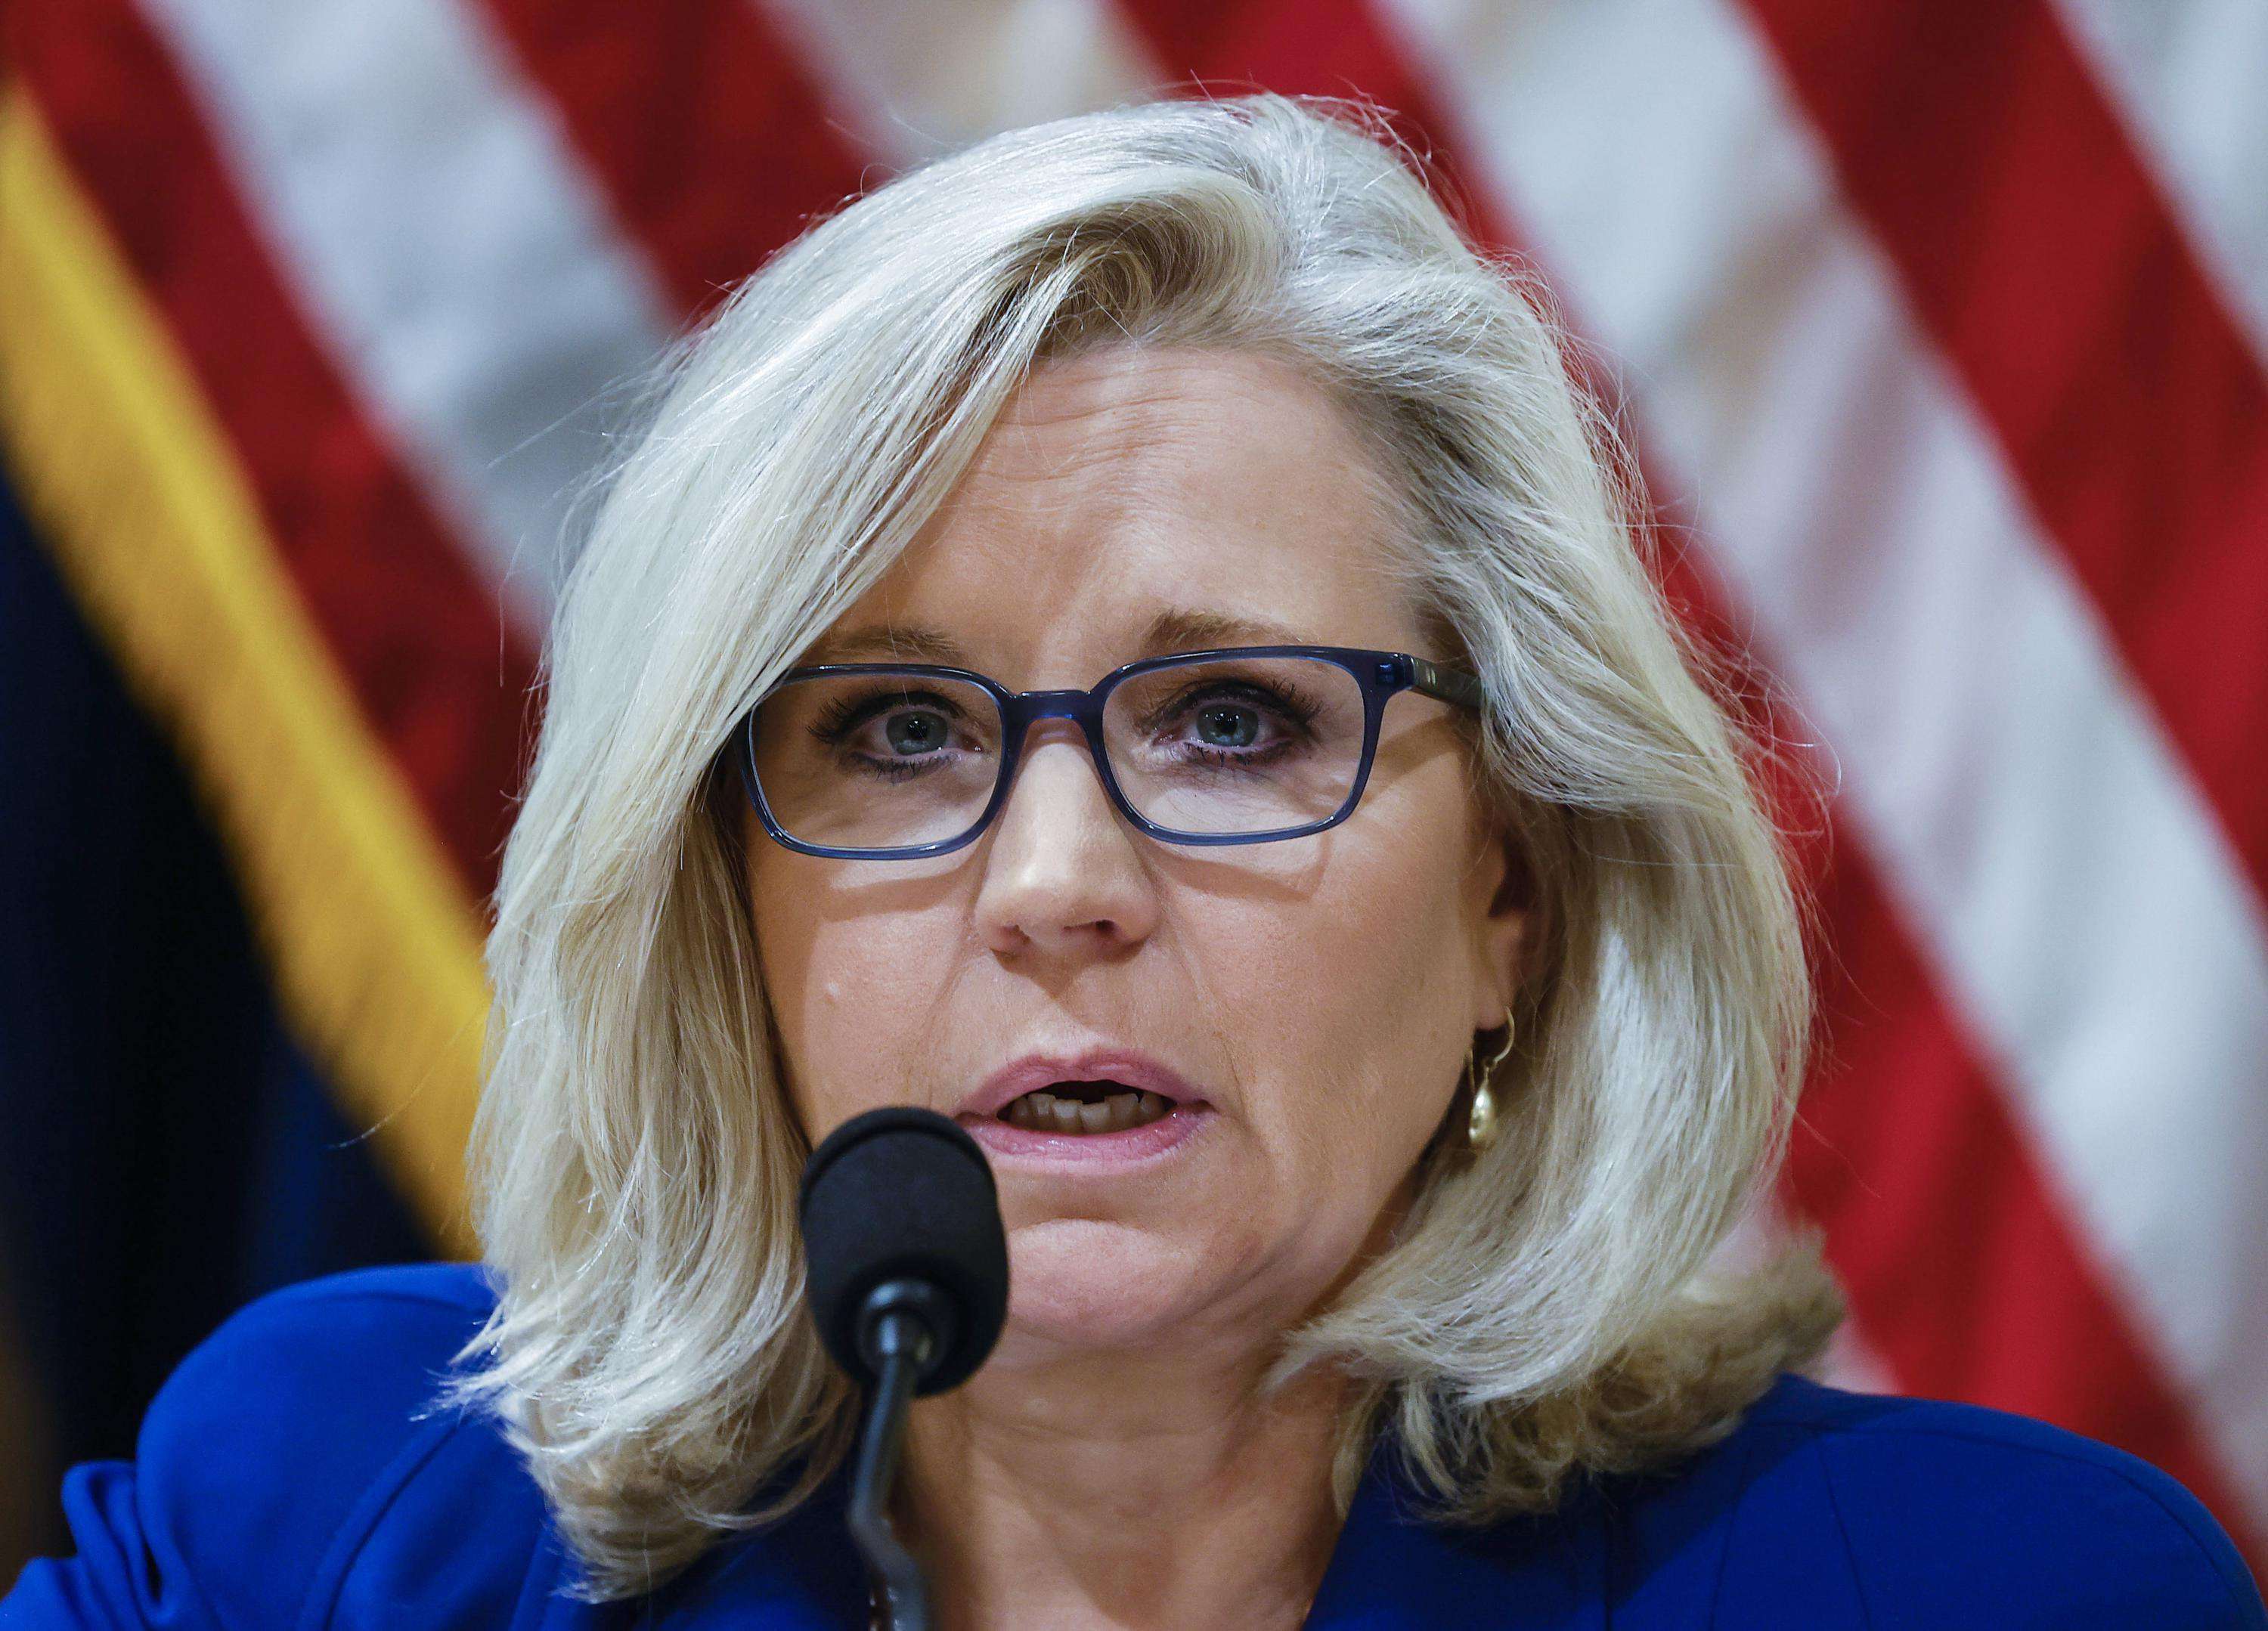 image for Liz Cheney: `I was wrong’ in opposing gay marriage in past